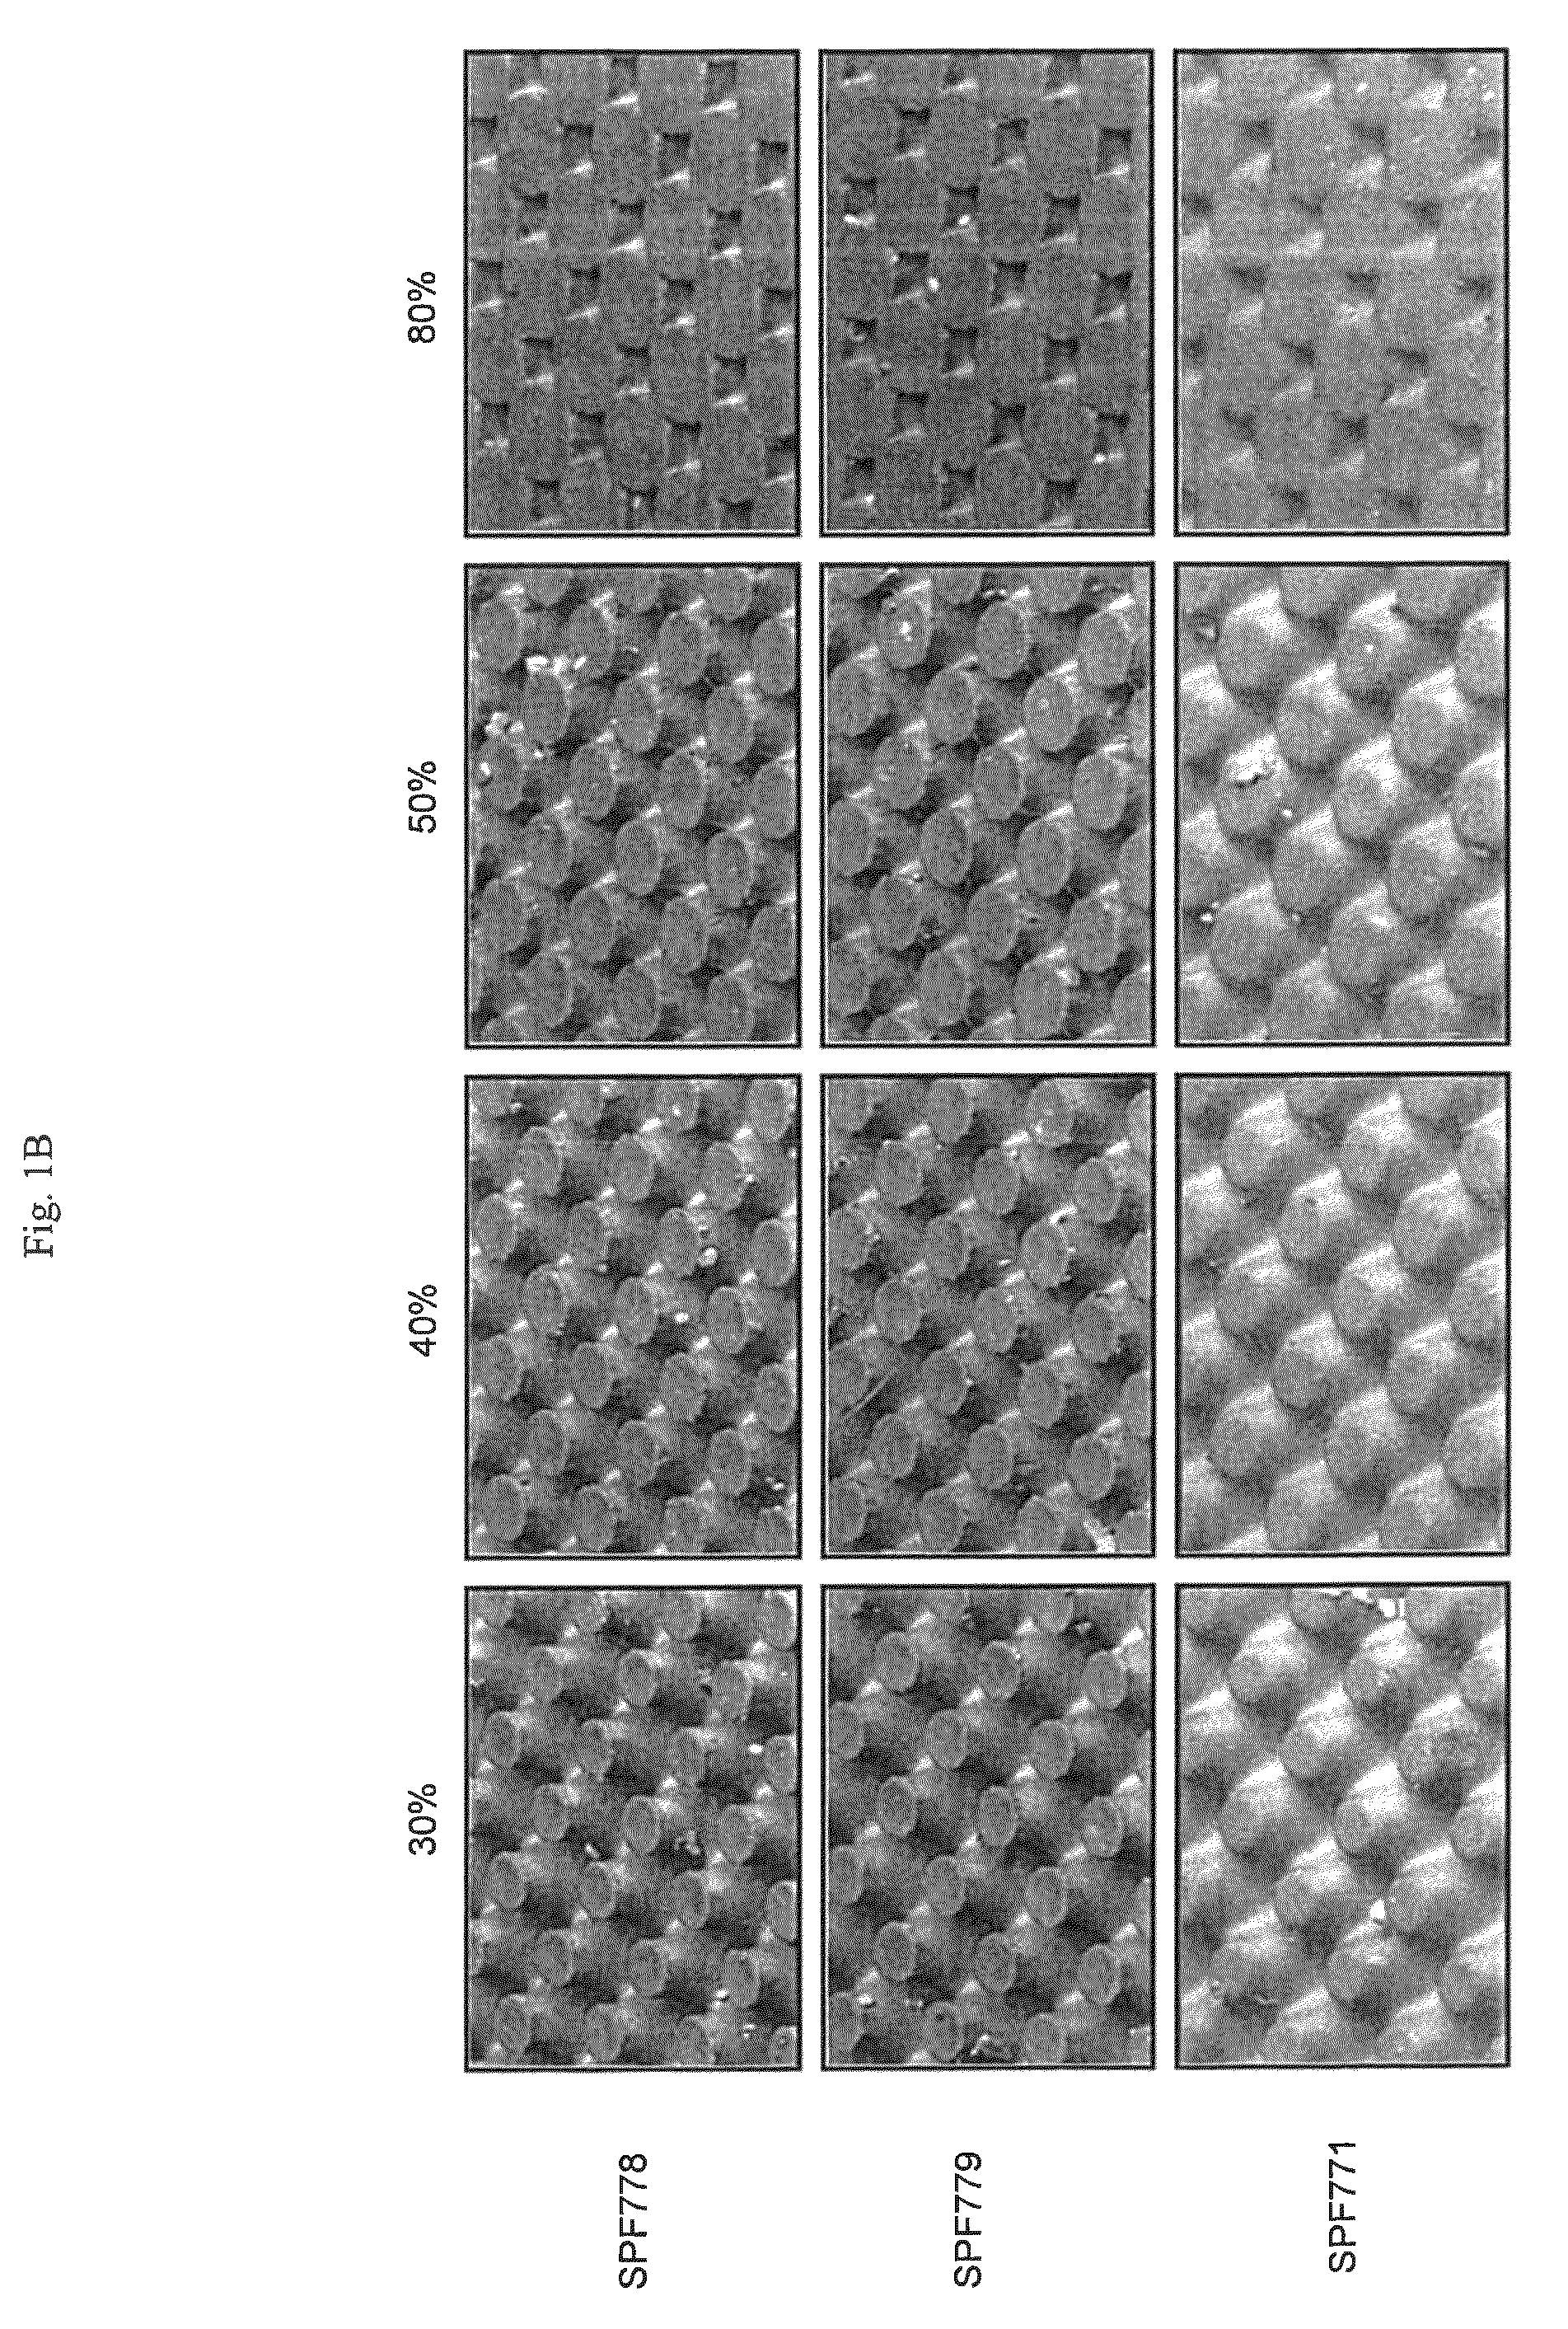 Method of improving surface cure in digital flexographic printing plates